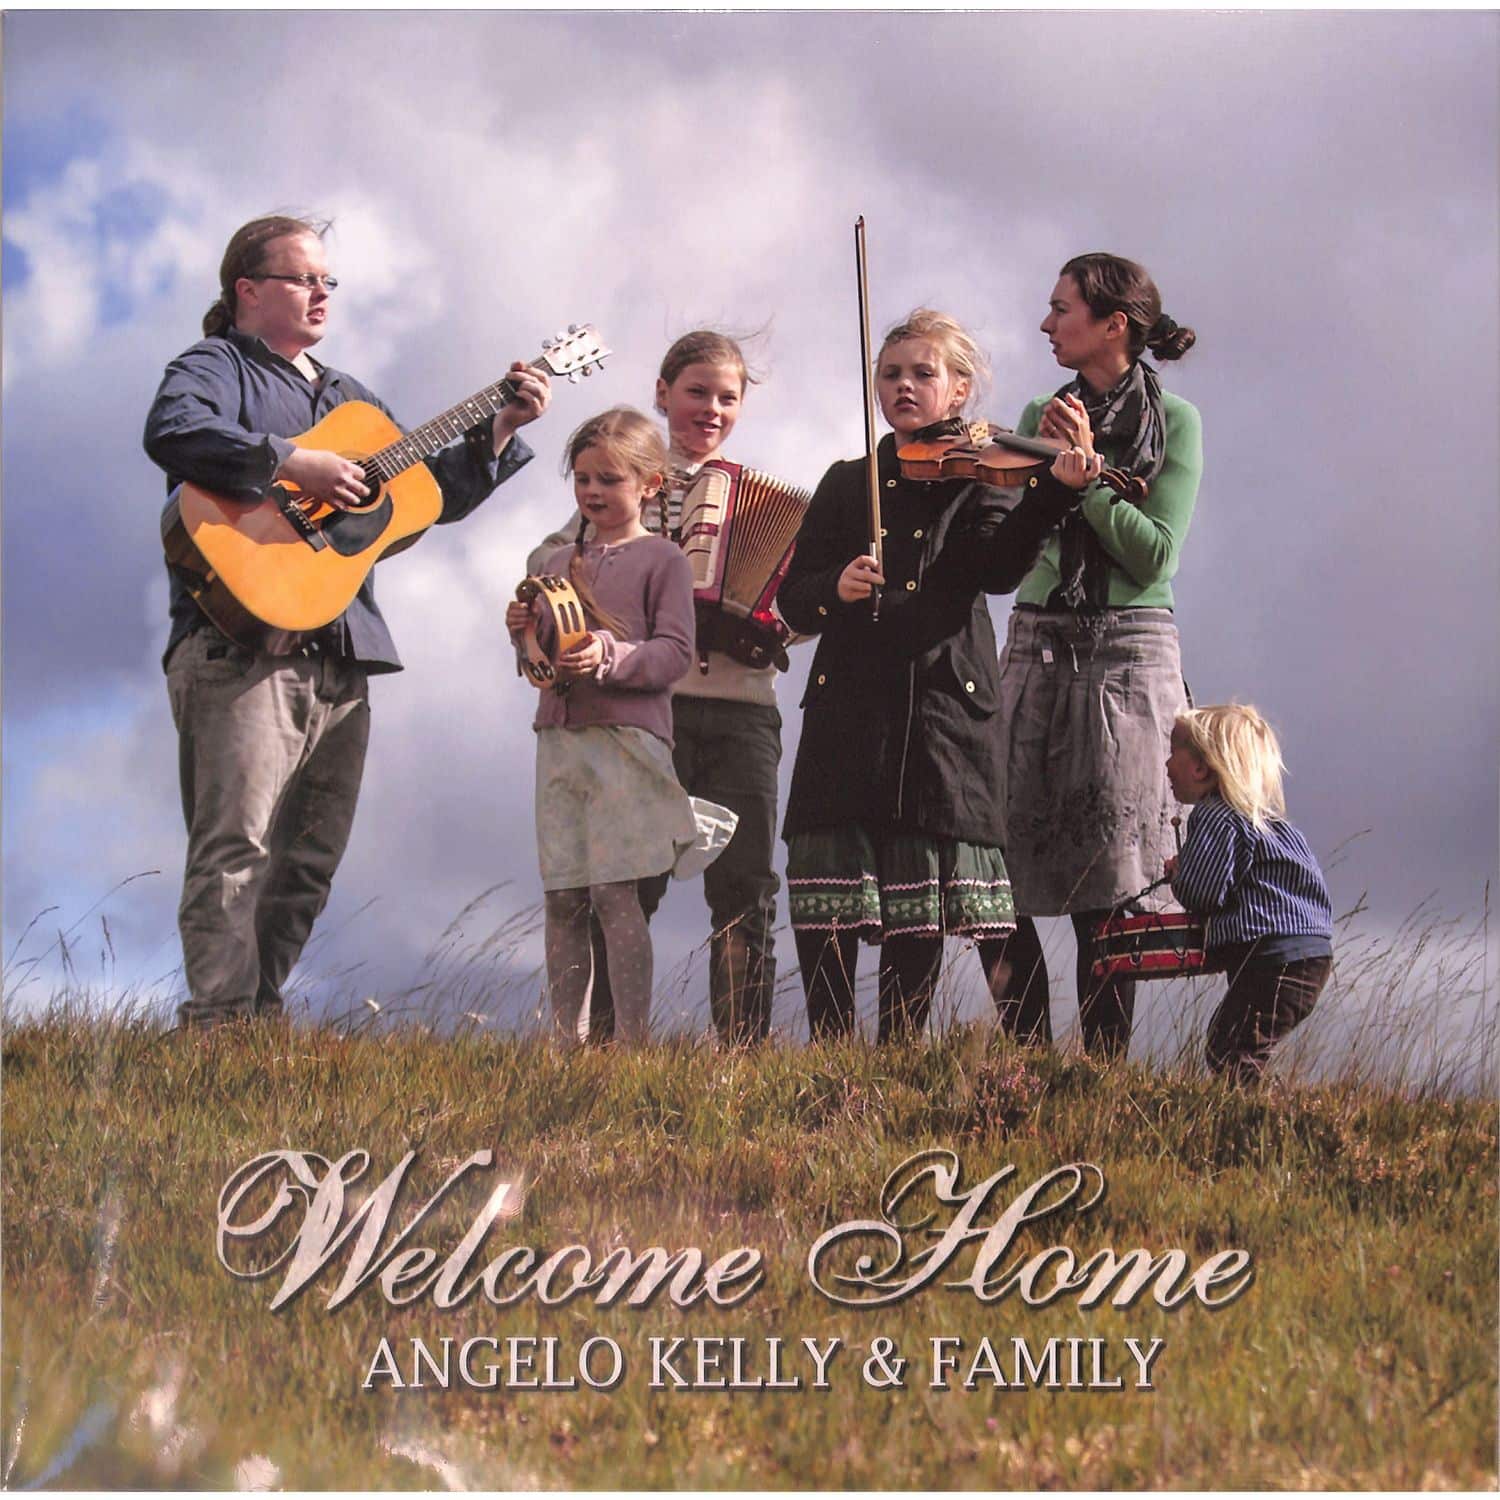 Angelo Kelly & Family - WELCOME HOME 